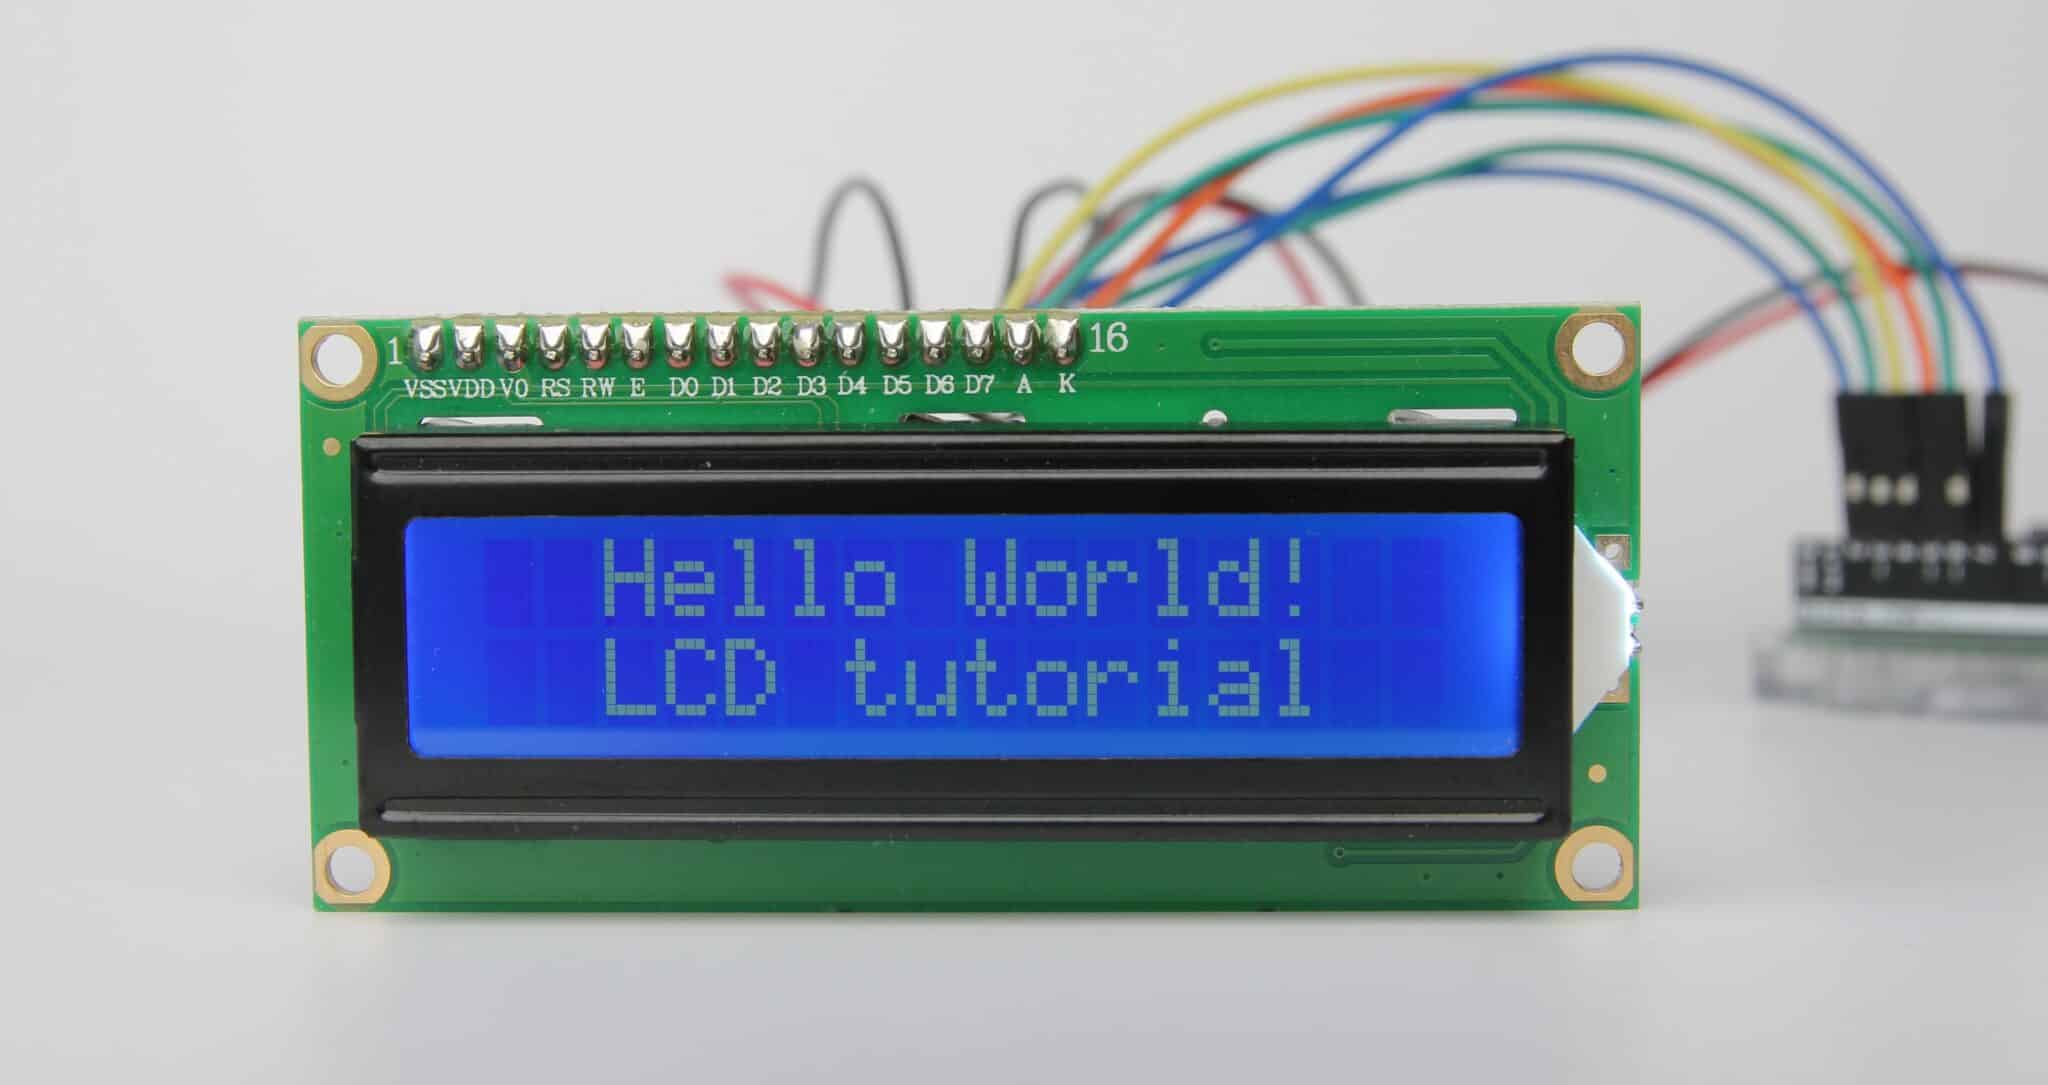 Lcd display tutorial for raspberry pi | rototron.